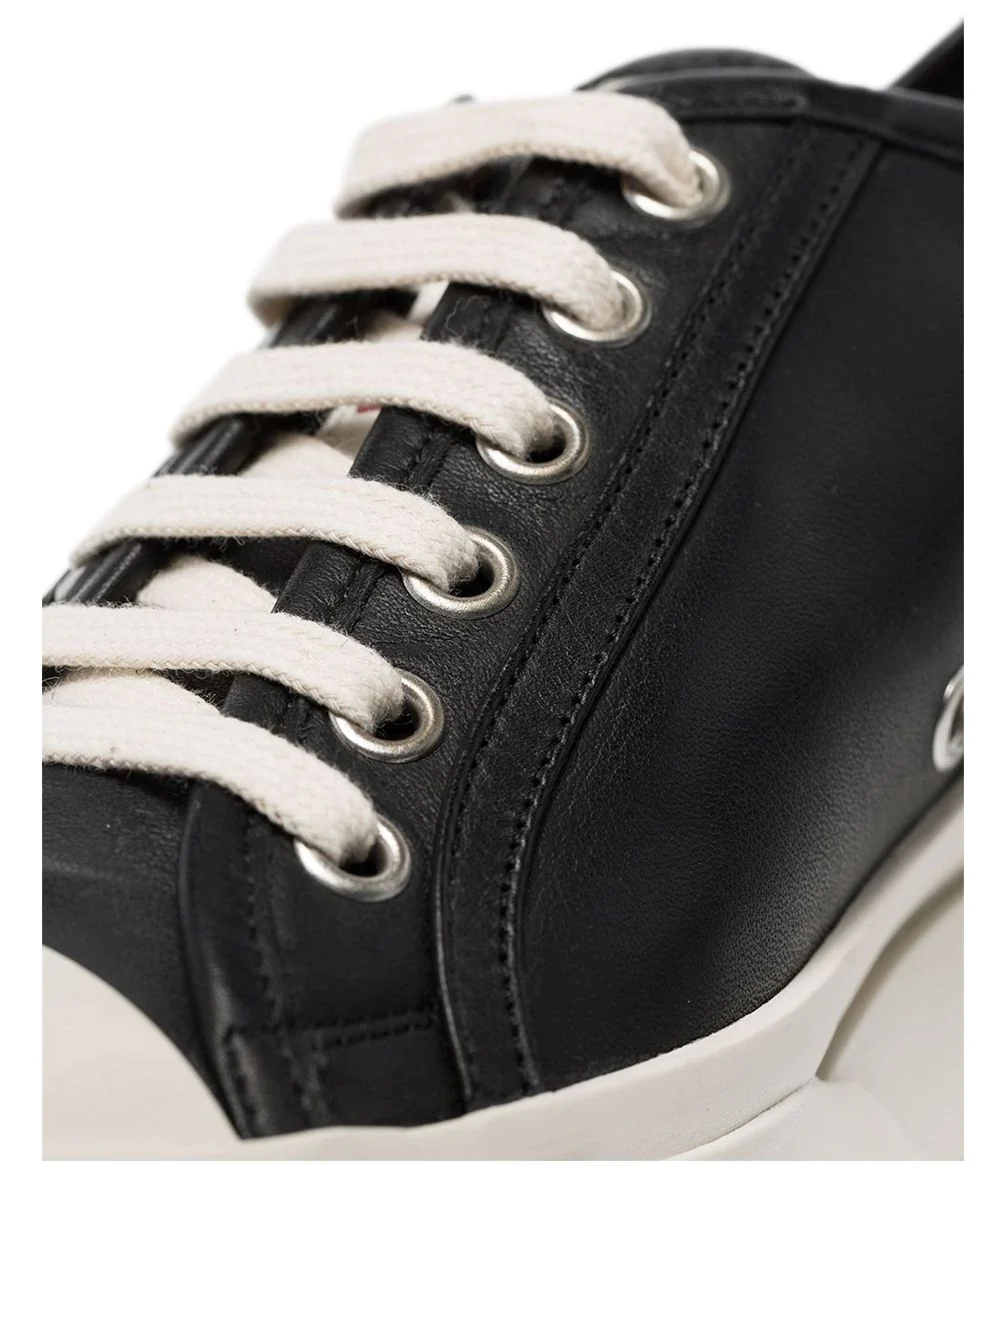 Marni Pablo Laced Up Shoe in Black/White – Hampden Clothing